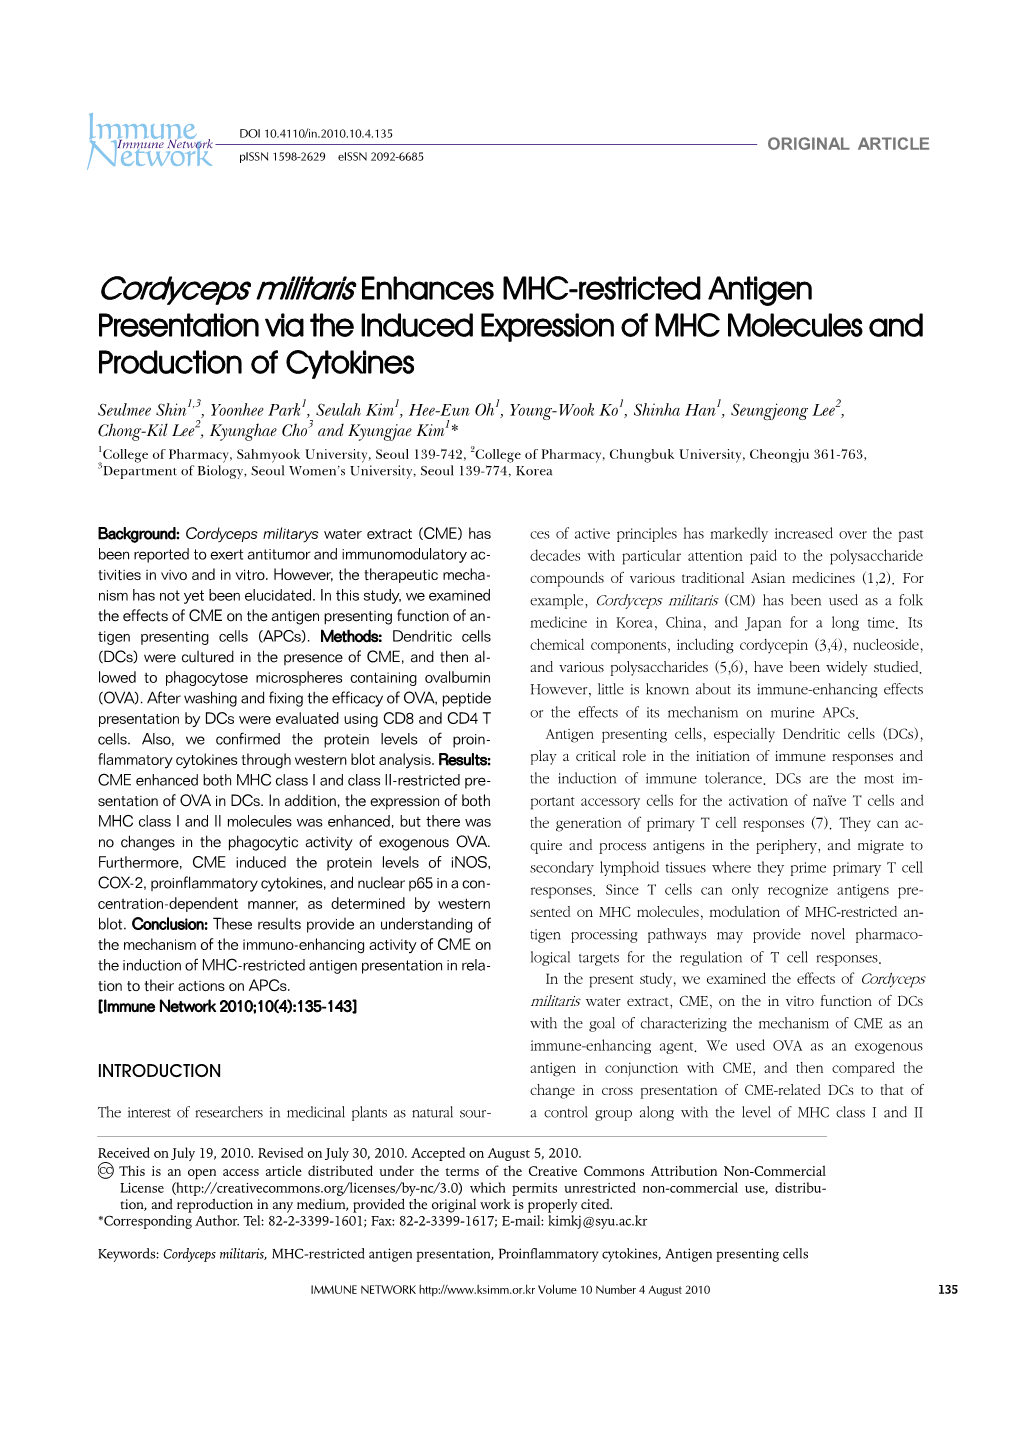 Cordyceps Militaris Enhances MHC-Restricted Antigen Presentation Via the Induced Expression of MHC Molecules and Production of Cytokines